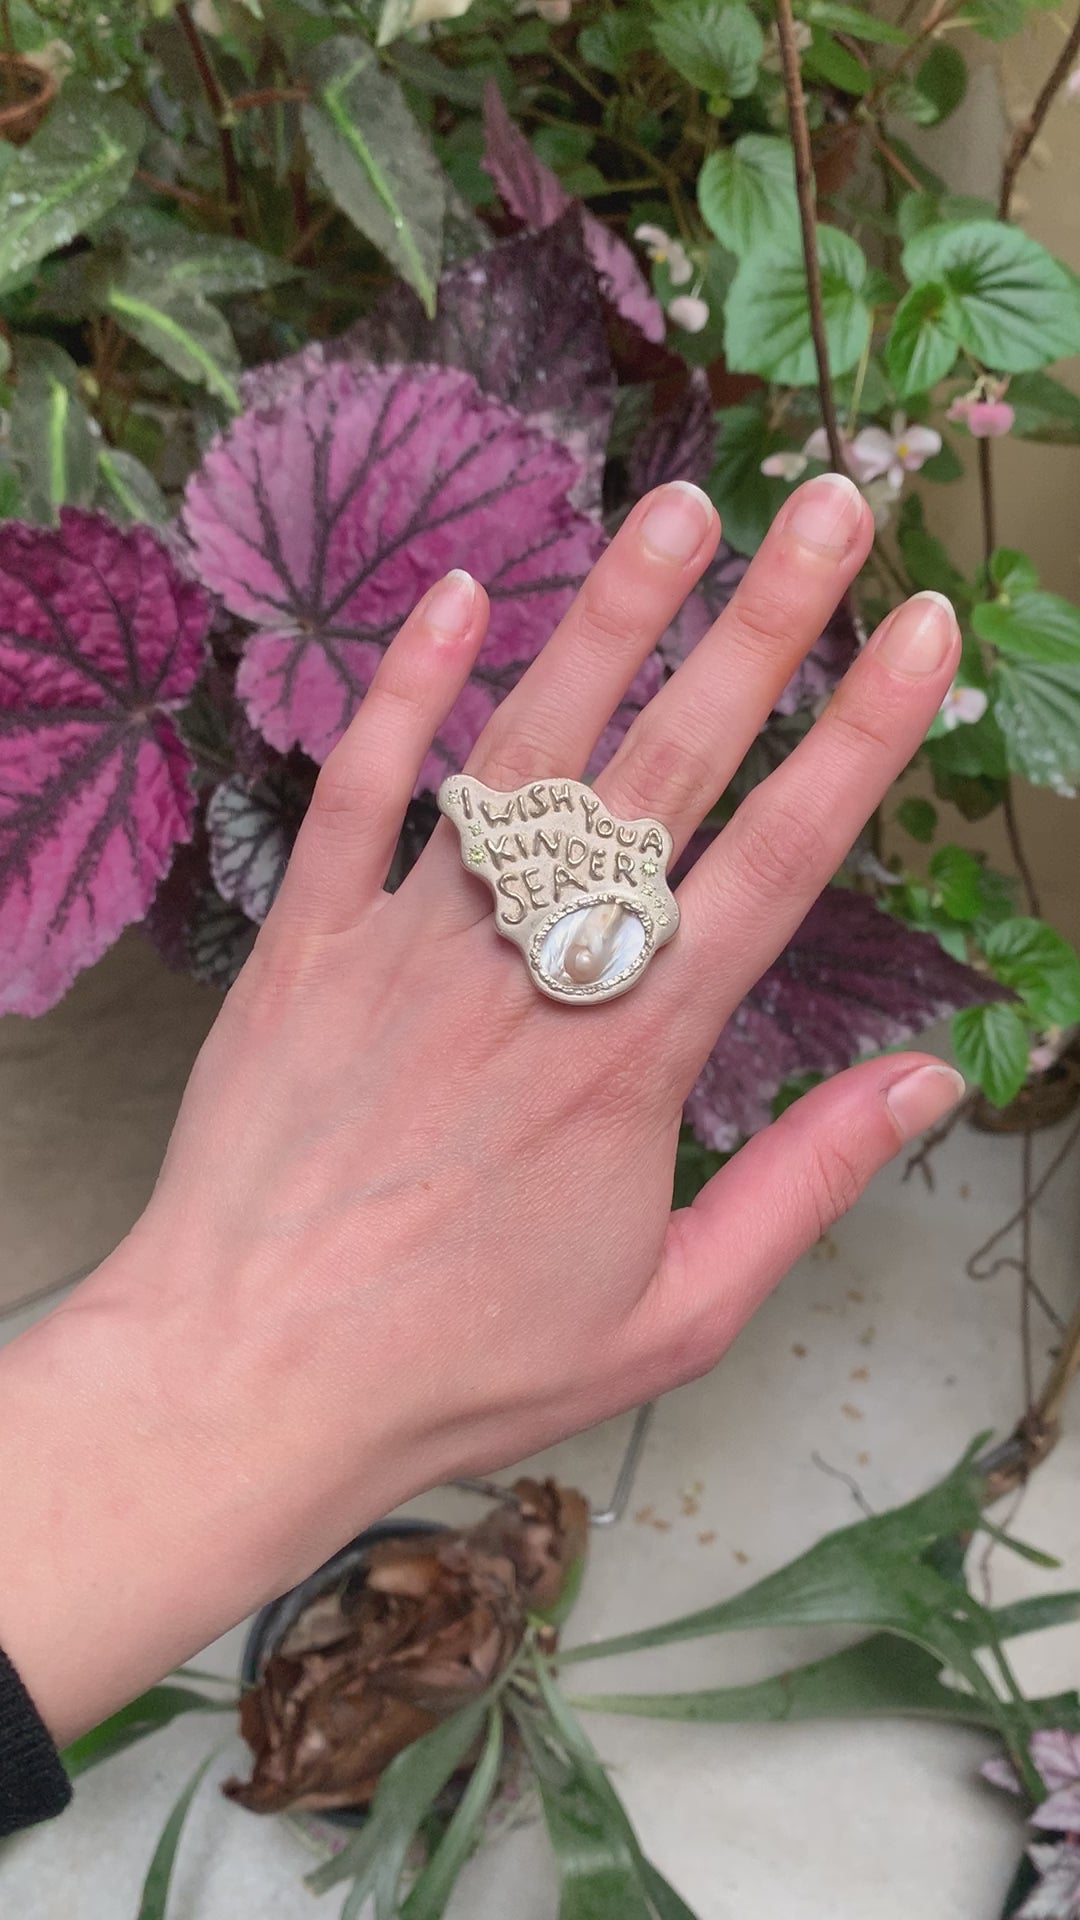 A large silver ring made from responsible jewellery council certified sterling silver, a pearl and set with peridot stones. The ring features a quote by Emily Dickinson that ready: I Wish You A Kinder Sea. The ring is hand-sculpted by Violette Stehli.